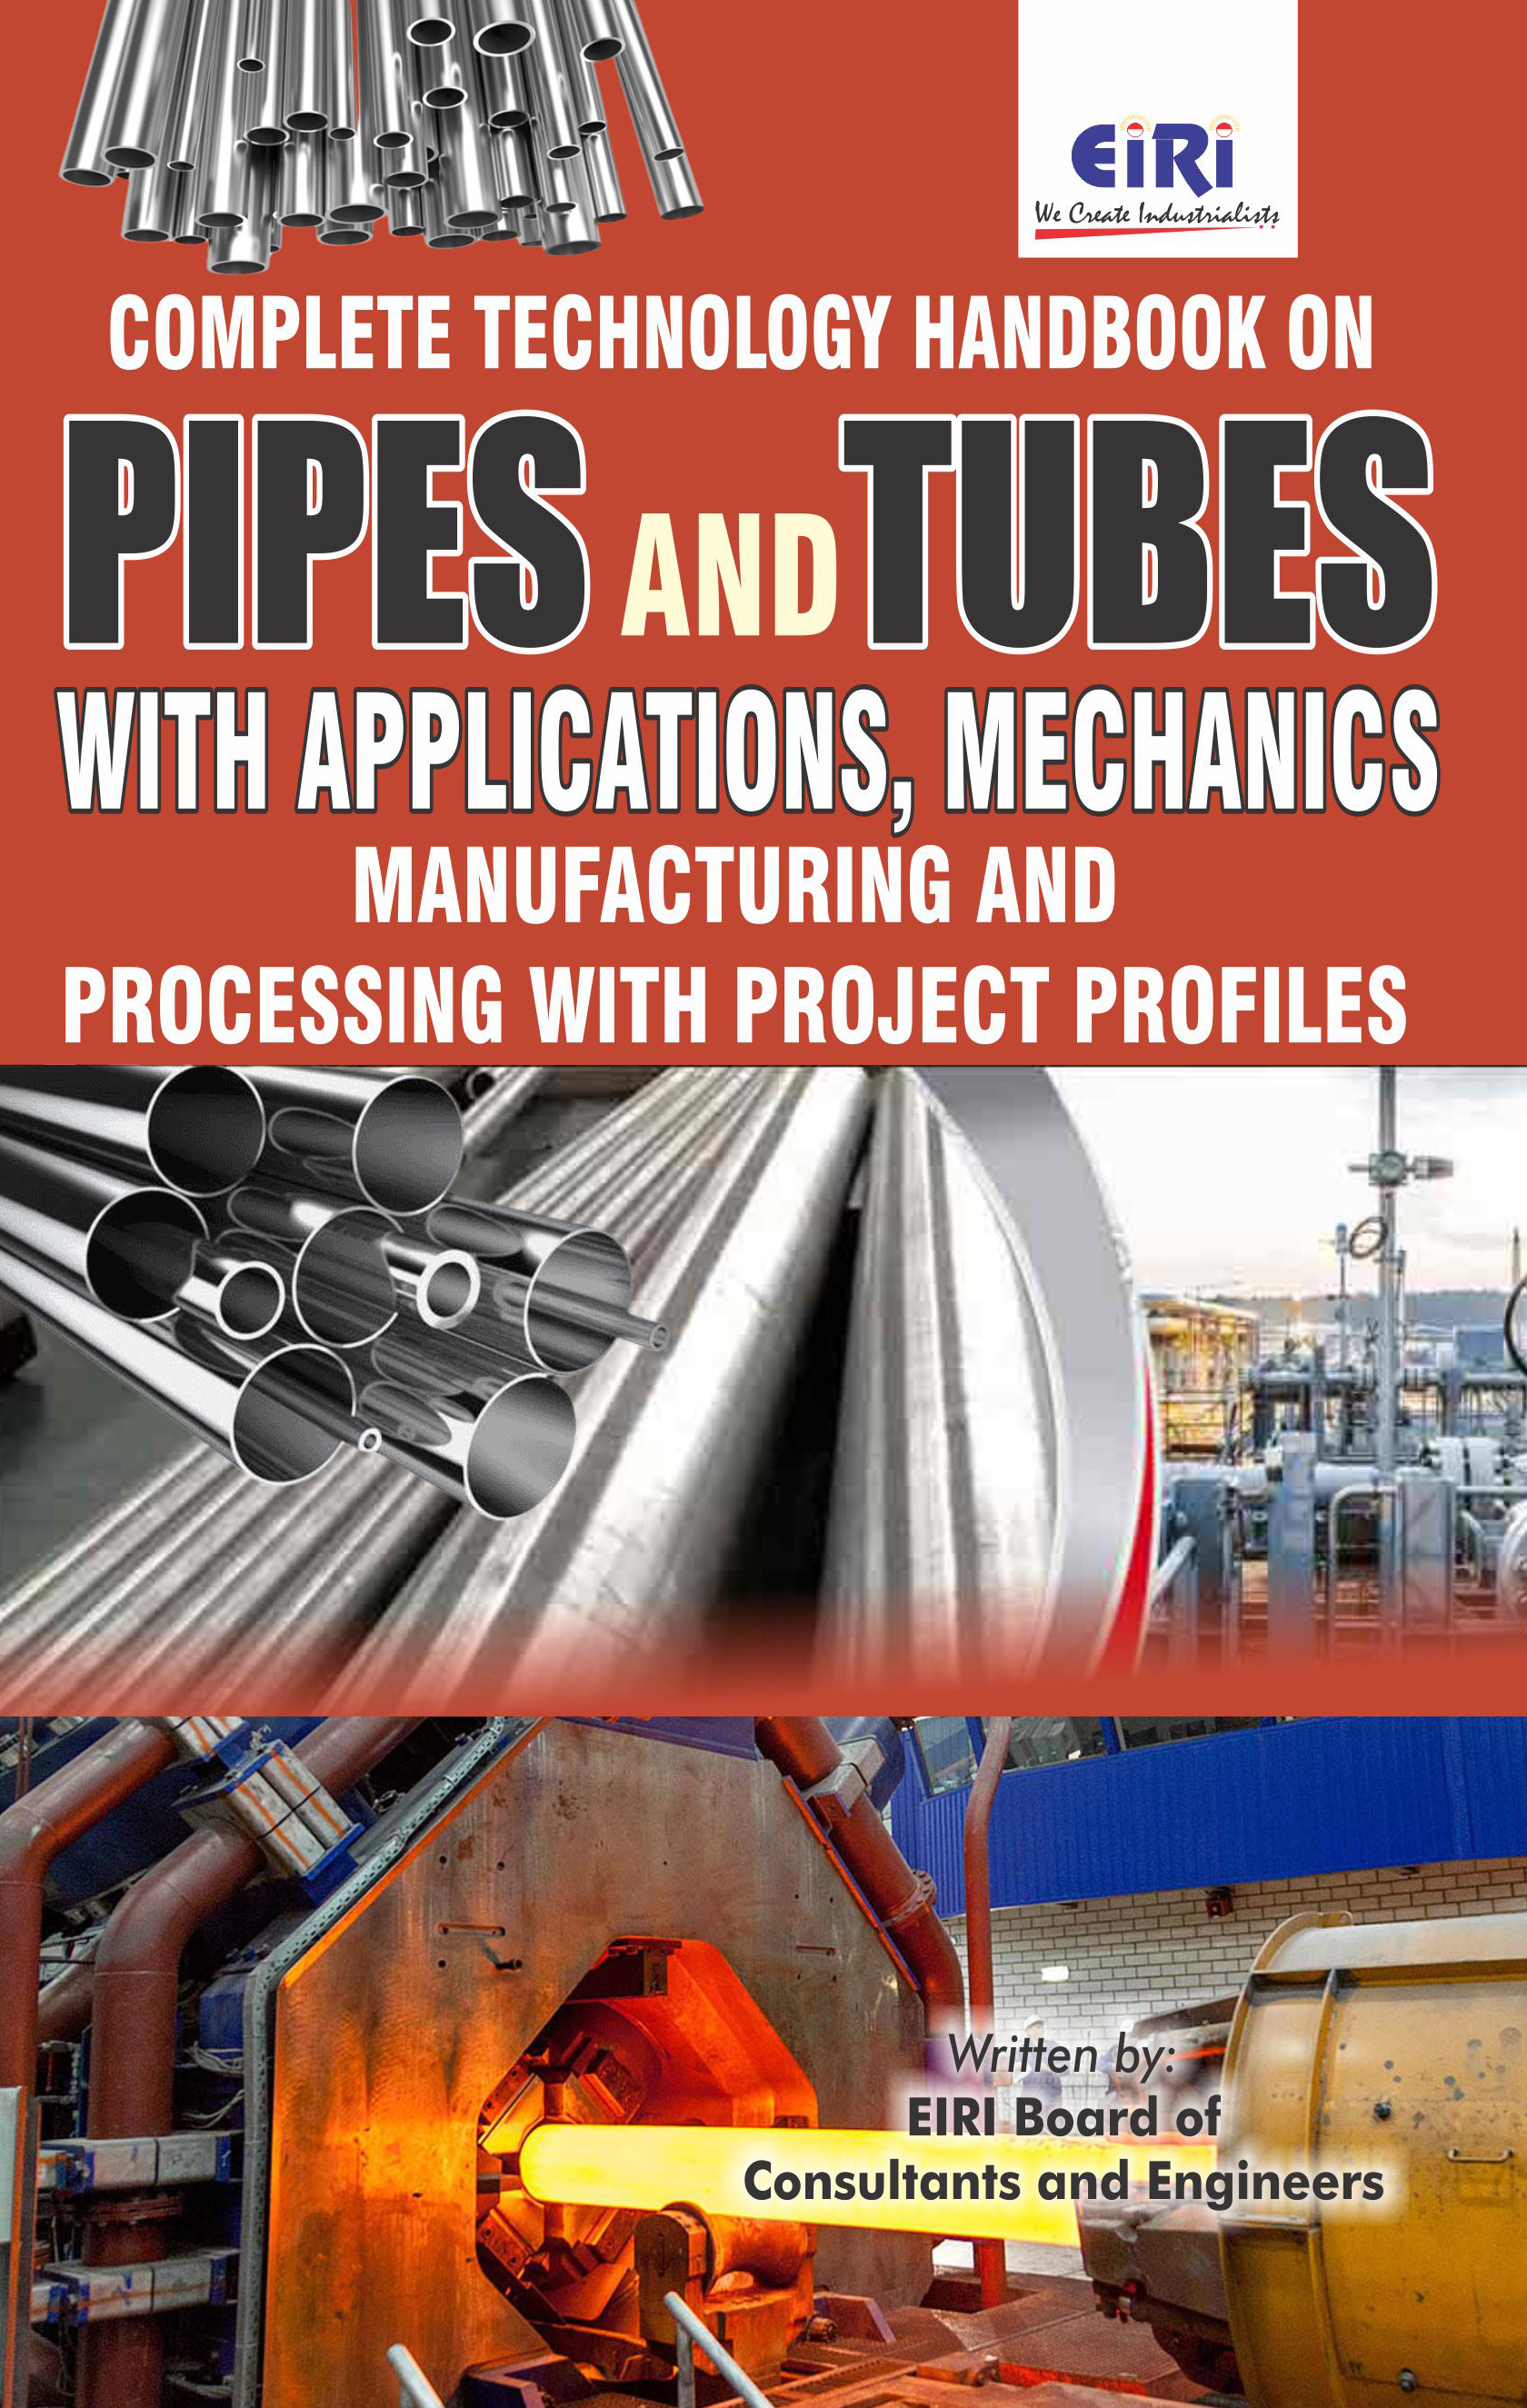 Complete Technology Handbook on Pipes and Tubes with Applications, Mechanics, Manufacturing and Processing with Project Profiles